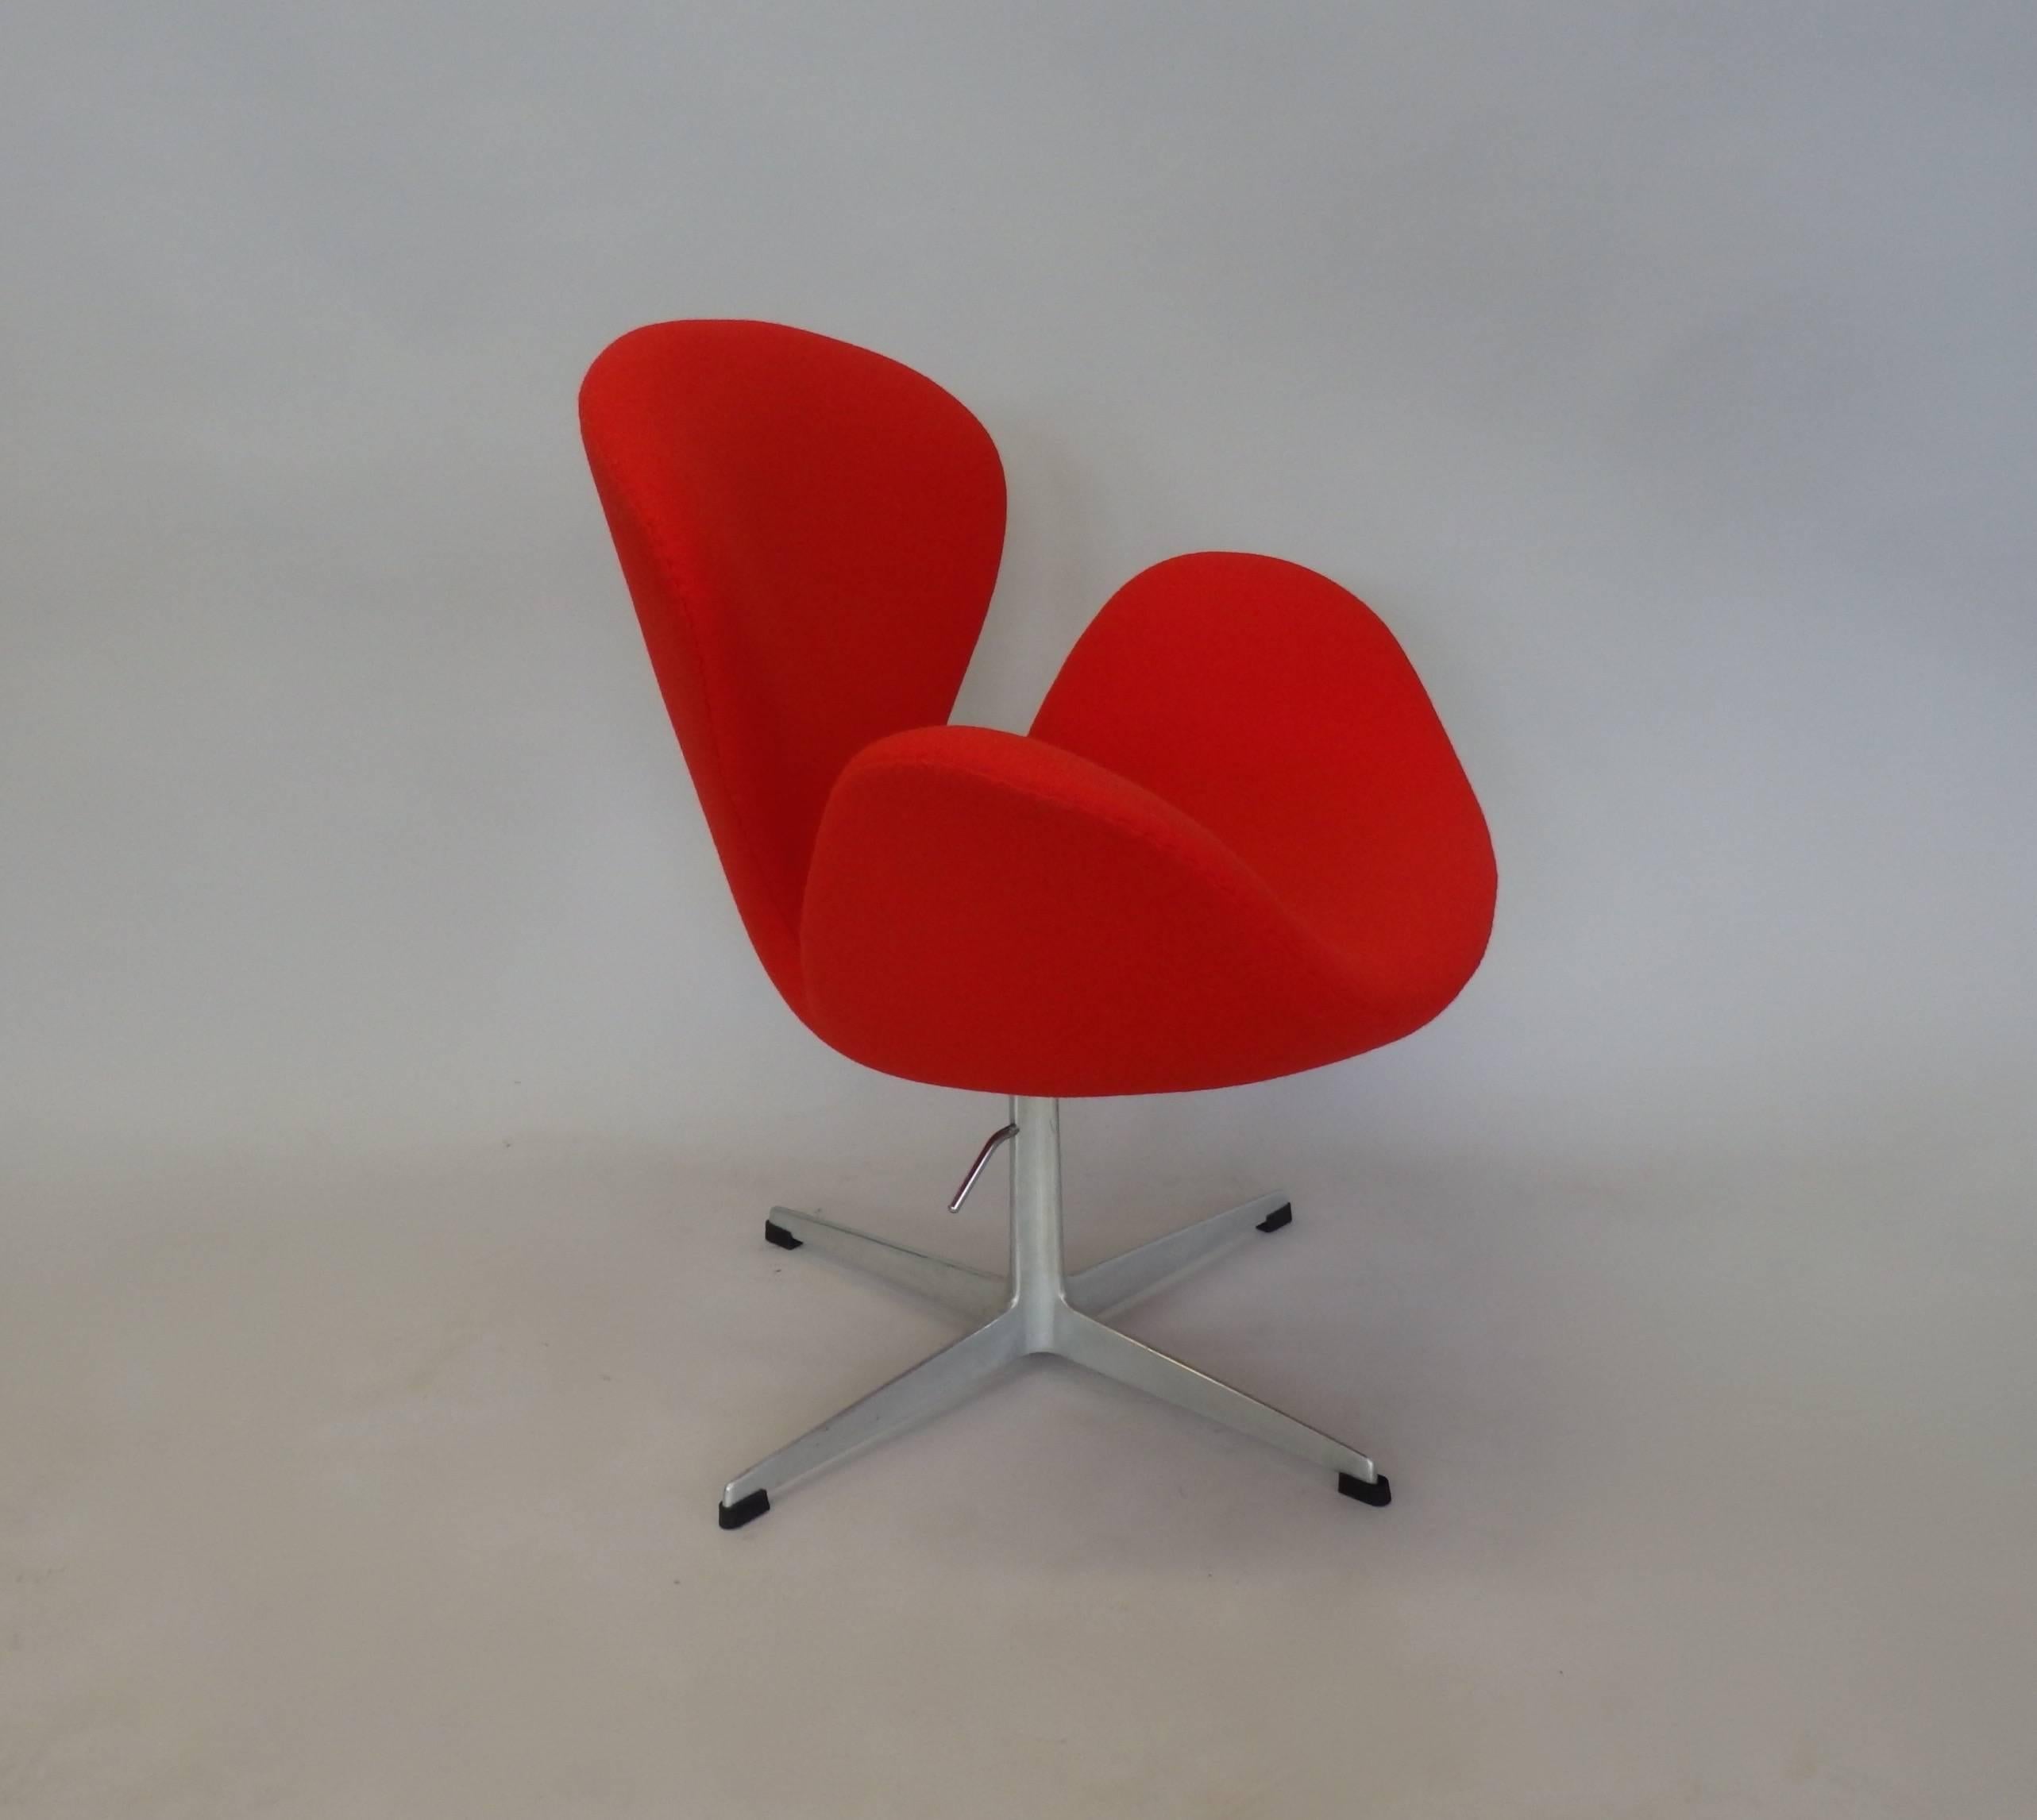 Properly restored Swan chair. Period correct Maharam wool blend textile over fresh foam. Fabric is hand-stitched around outer edge as original. Fritz Hansen label intact. Height adjustment adds 3